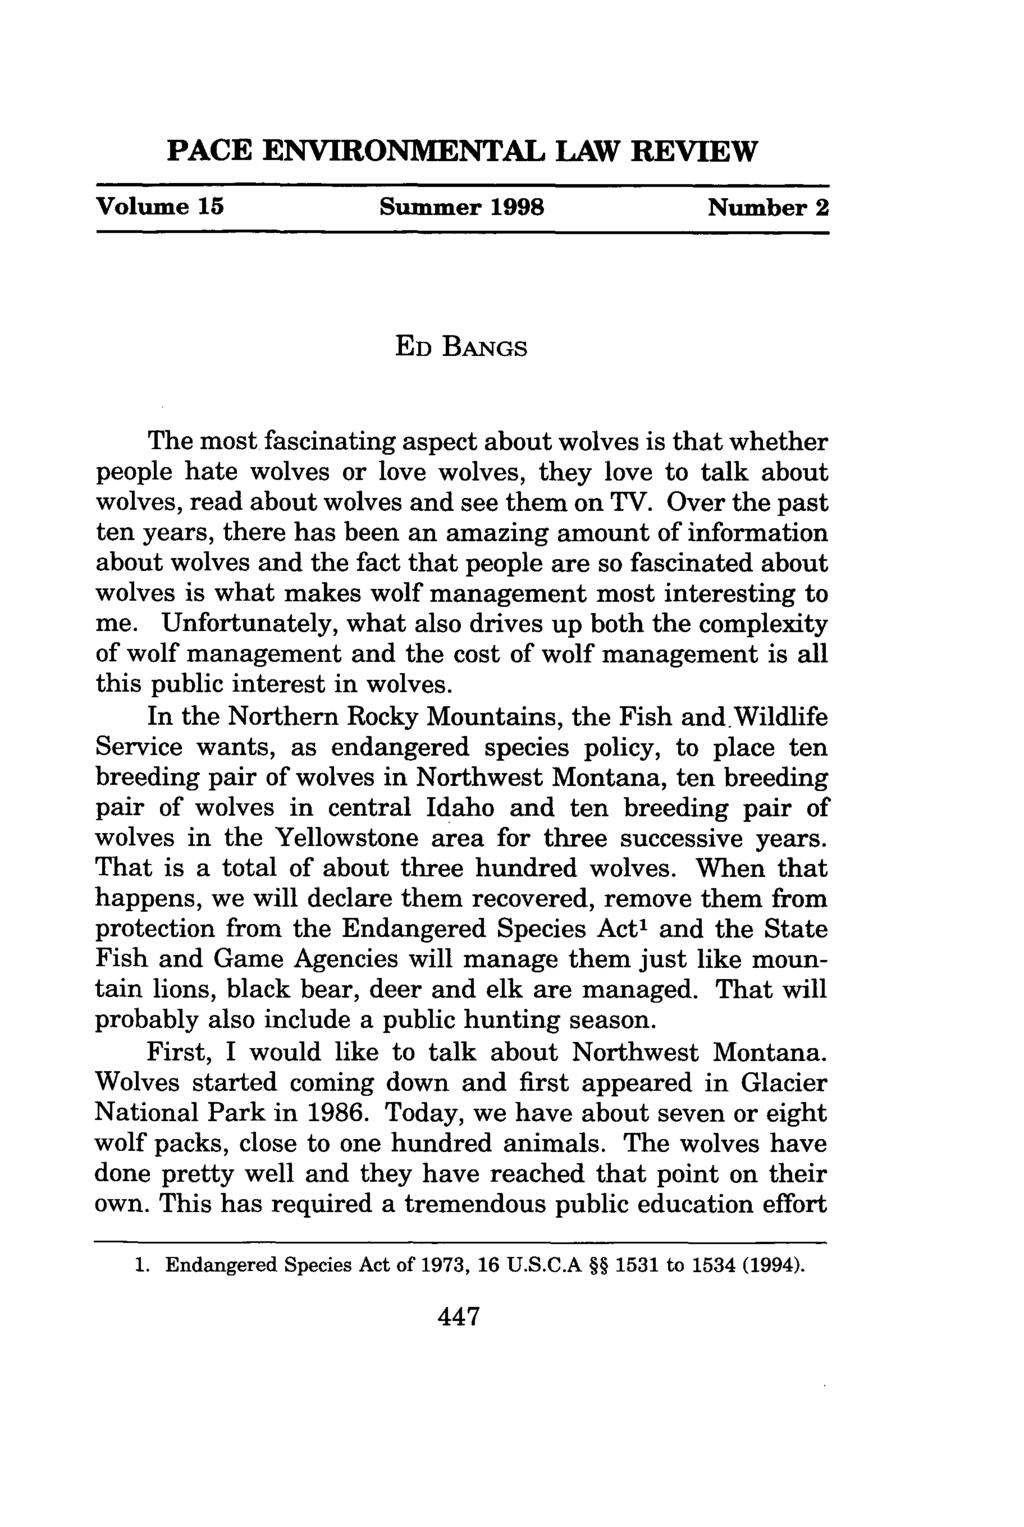 PACE ENVIRONMENTAL LAW REVIEW Volume 15 Summer 1998 Number 2 ED BANGS The most fascinating aspect about wolves is that whether people hate wolves or love wolves, they love to talk about wolves, read